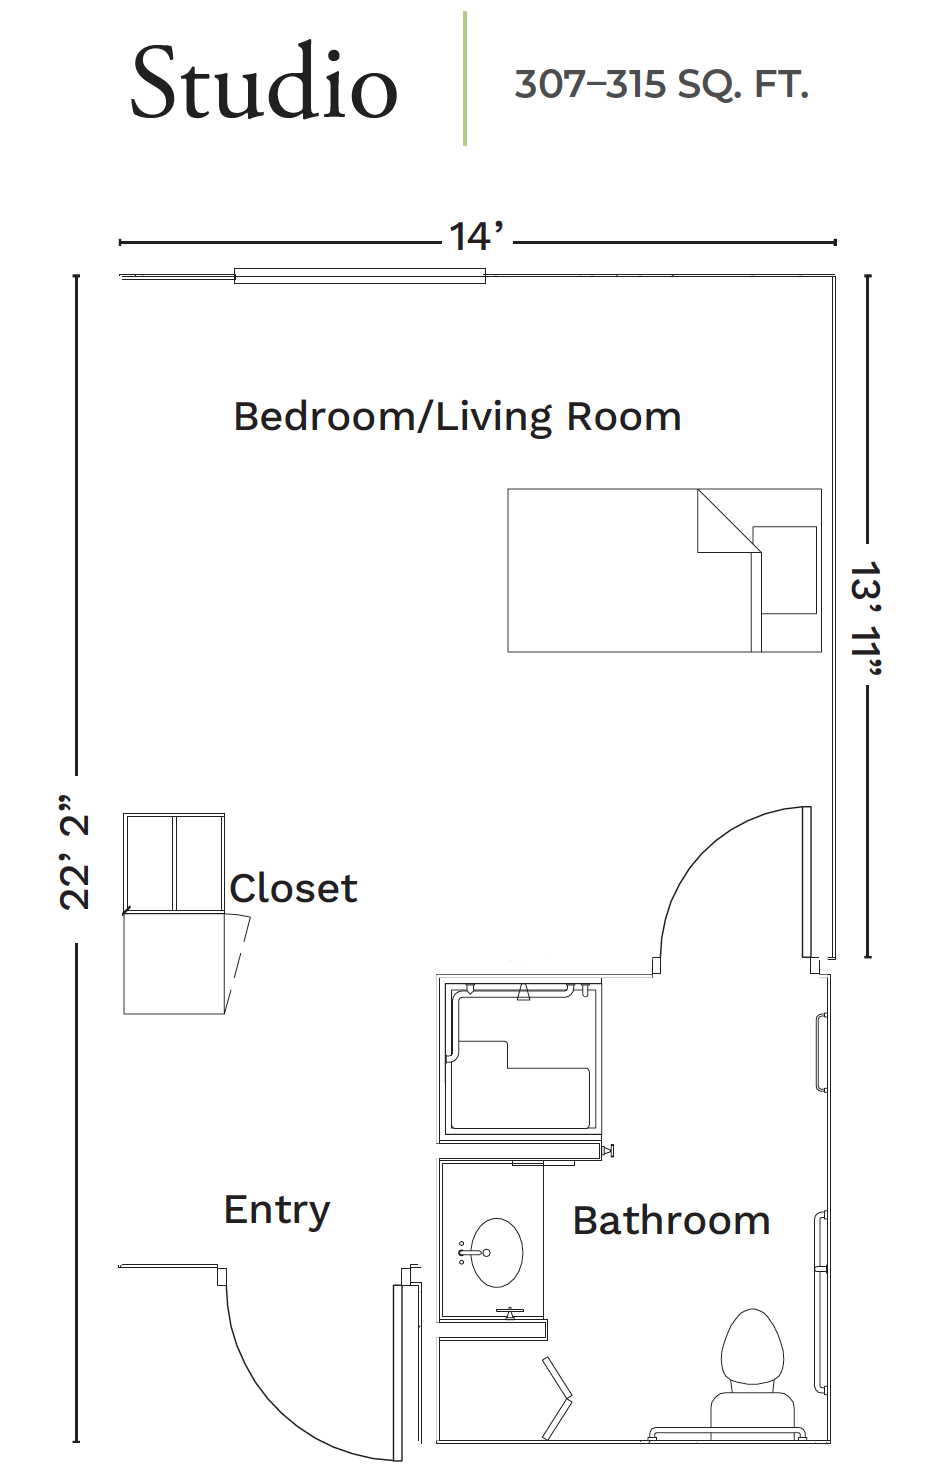 Floor plan of a studio apartment with labeled areas: bedroom/living room, bathroom, closet, and entry.